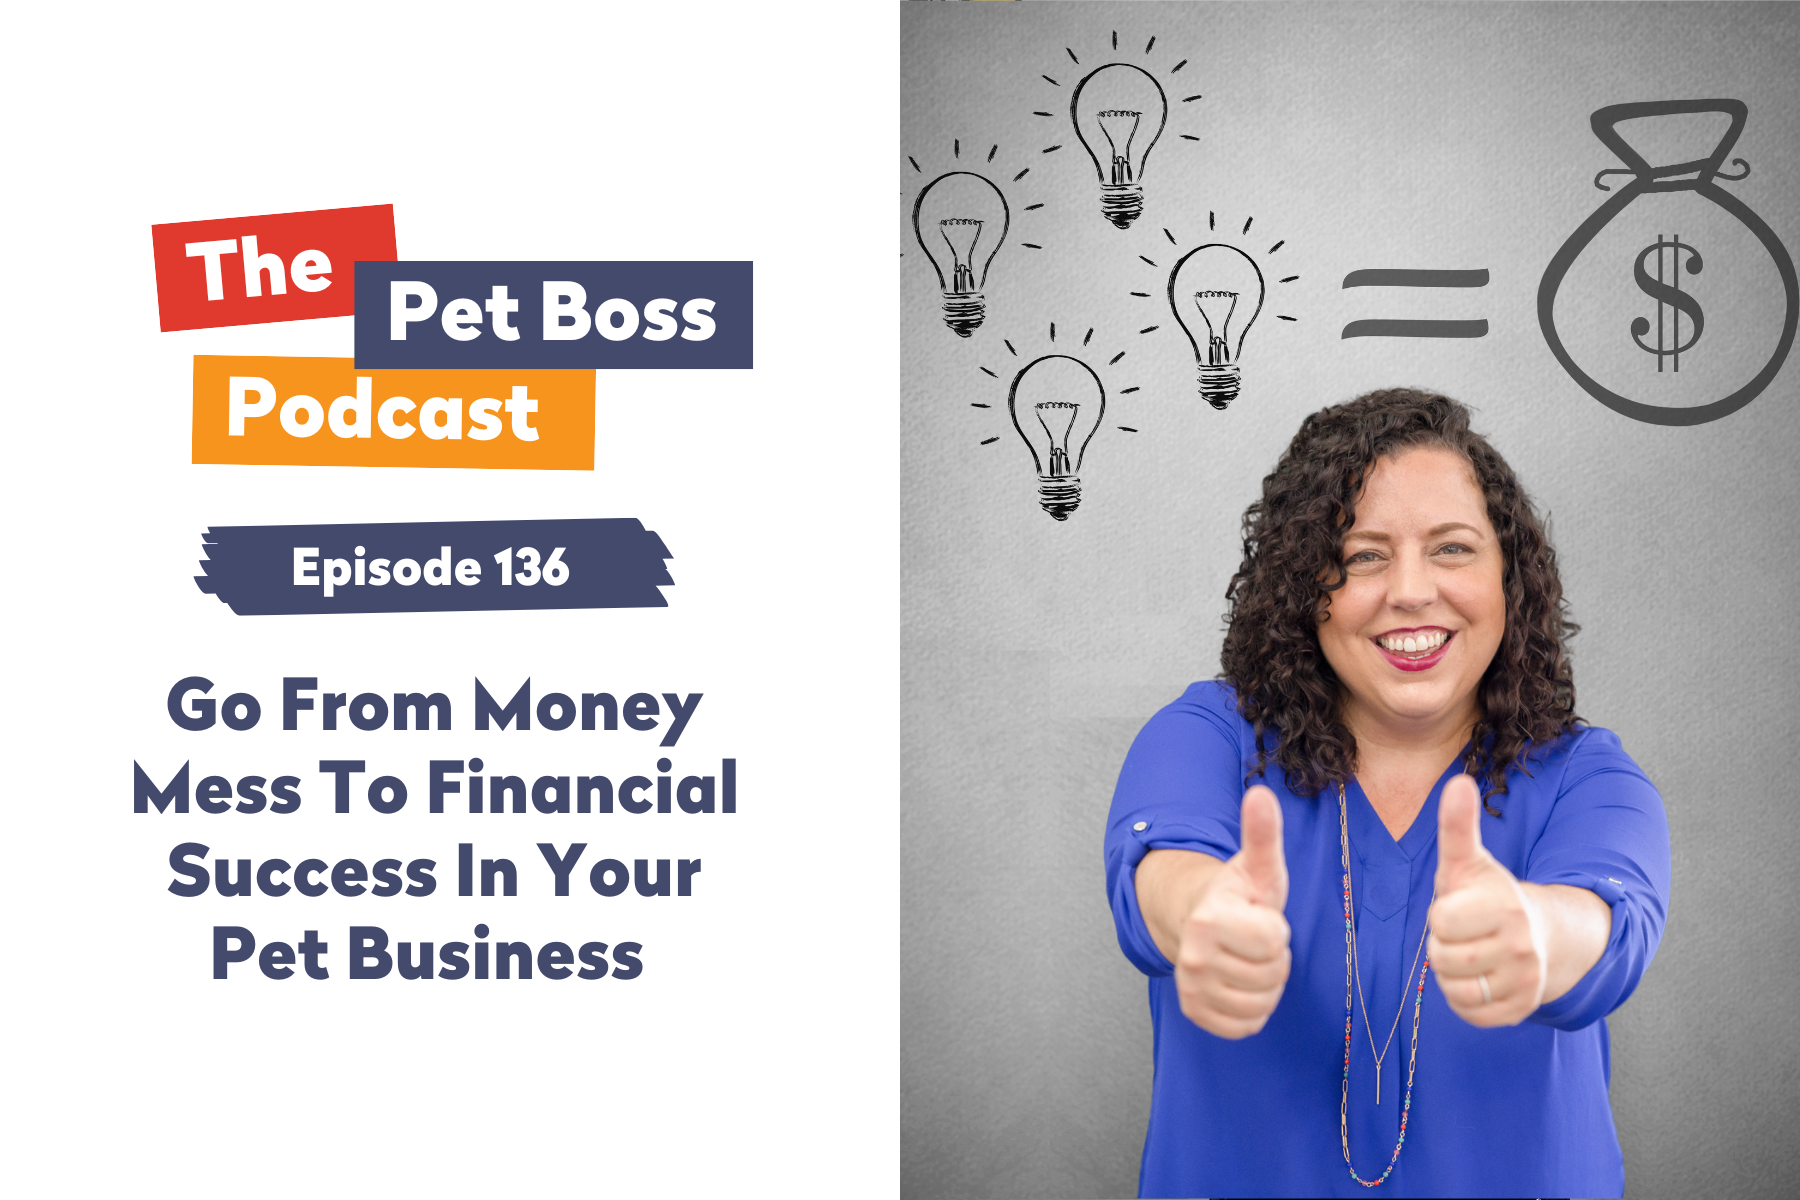 Episode 136 | Go From Money Mess To Financial Success In Your Pet Business